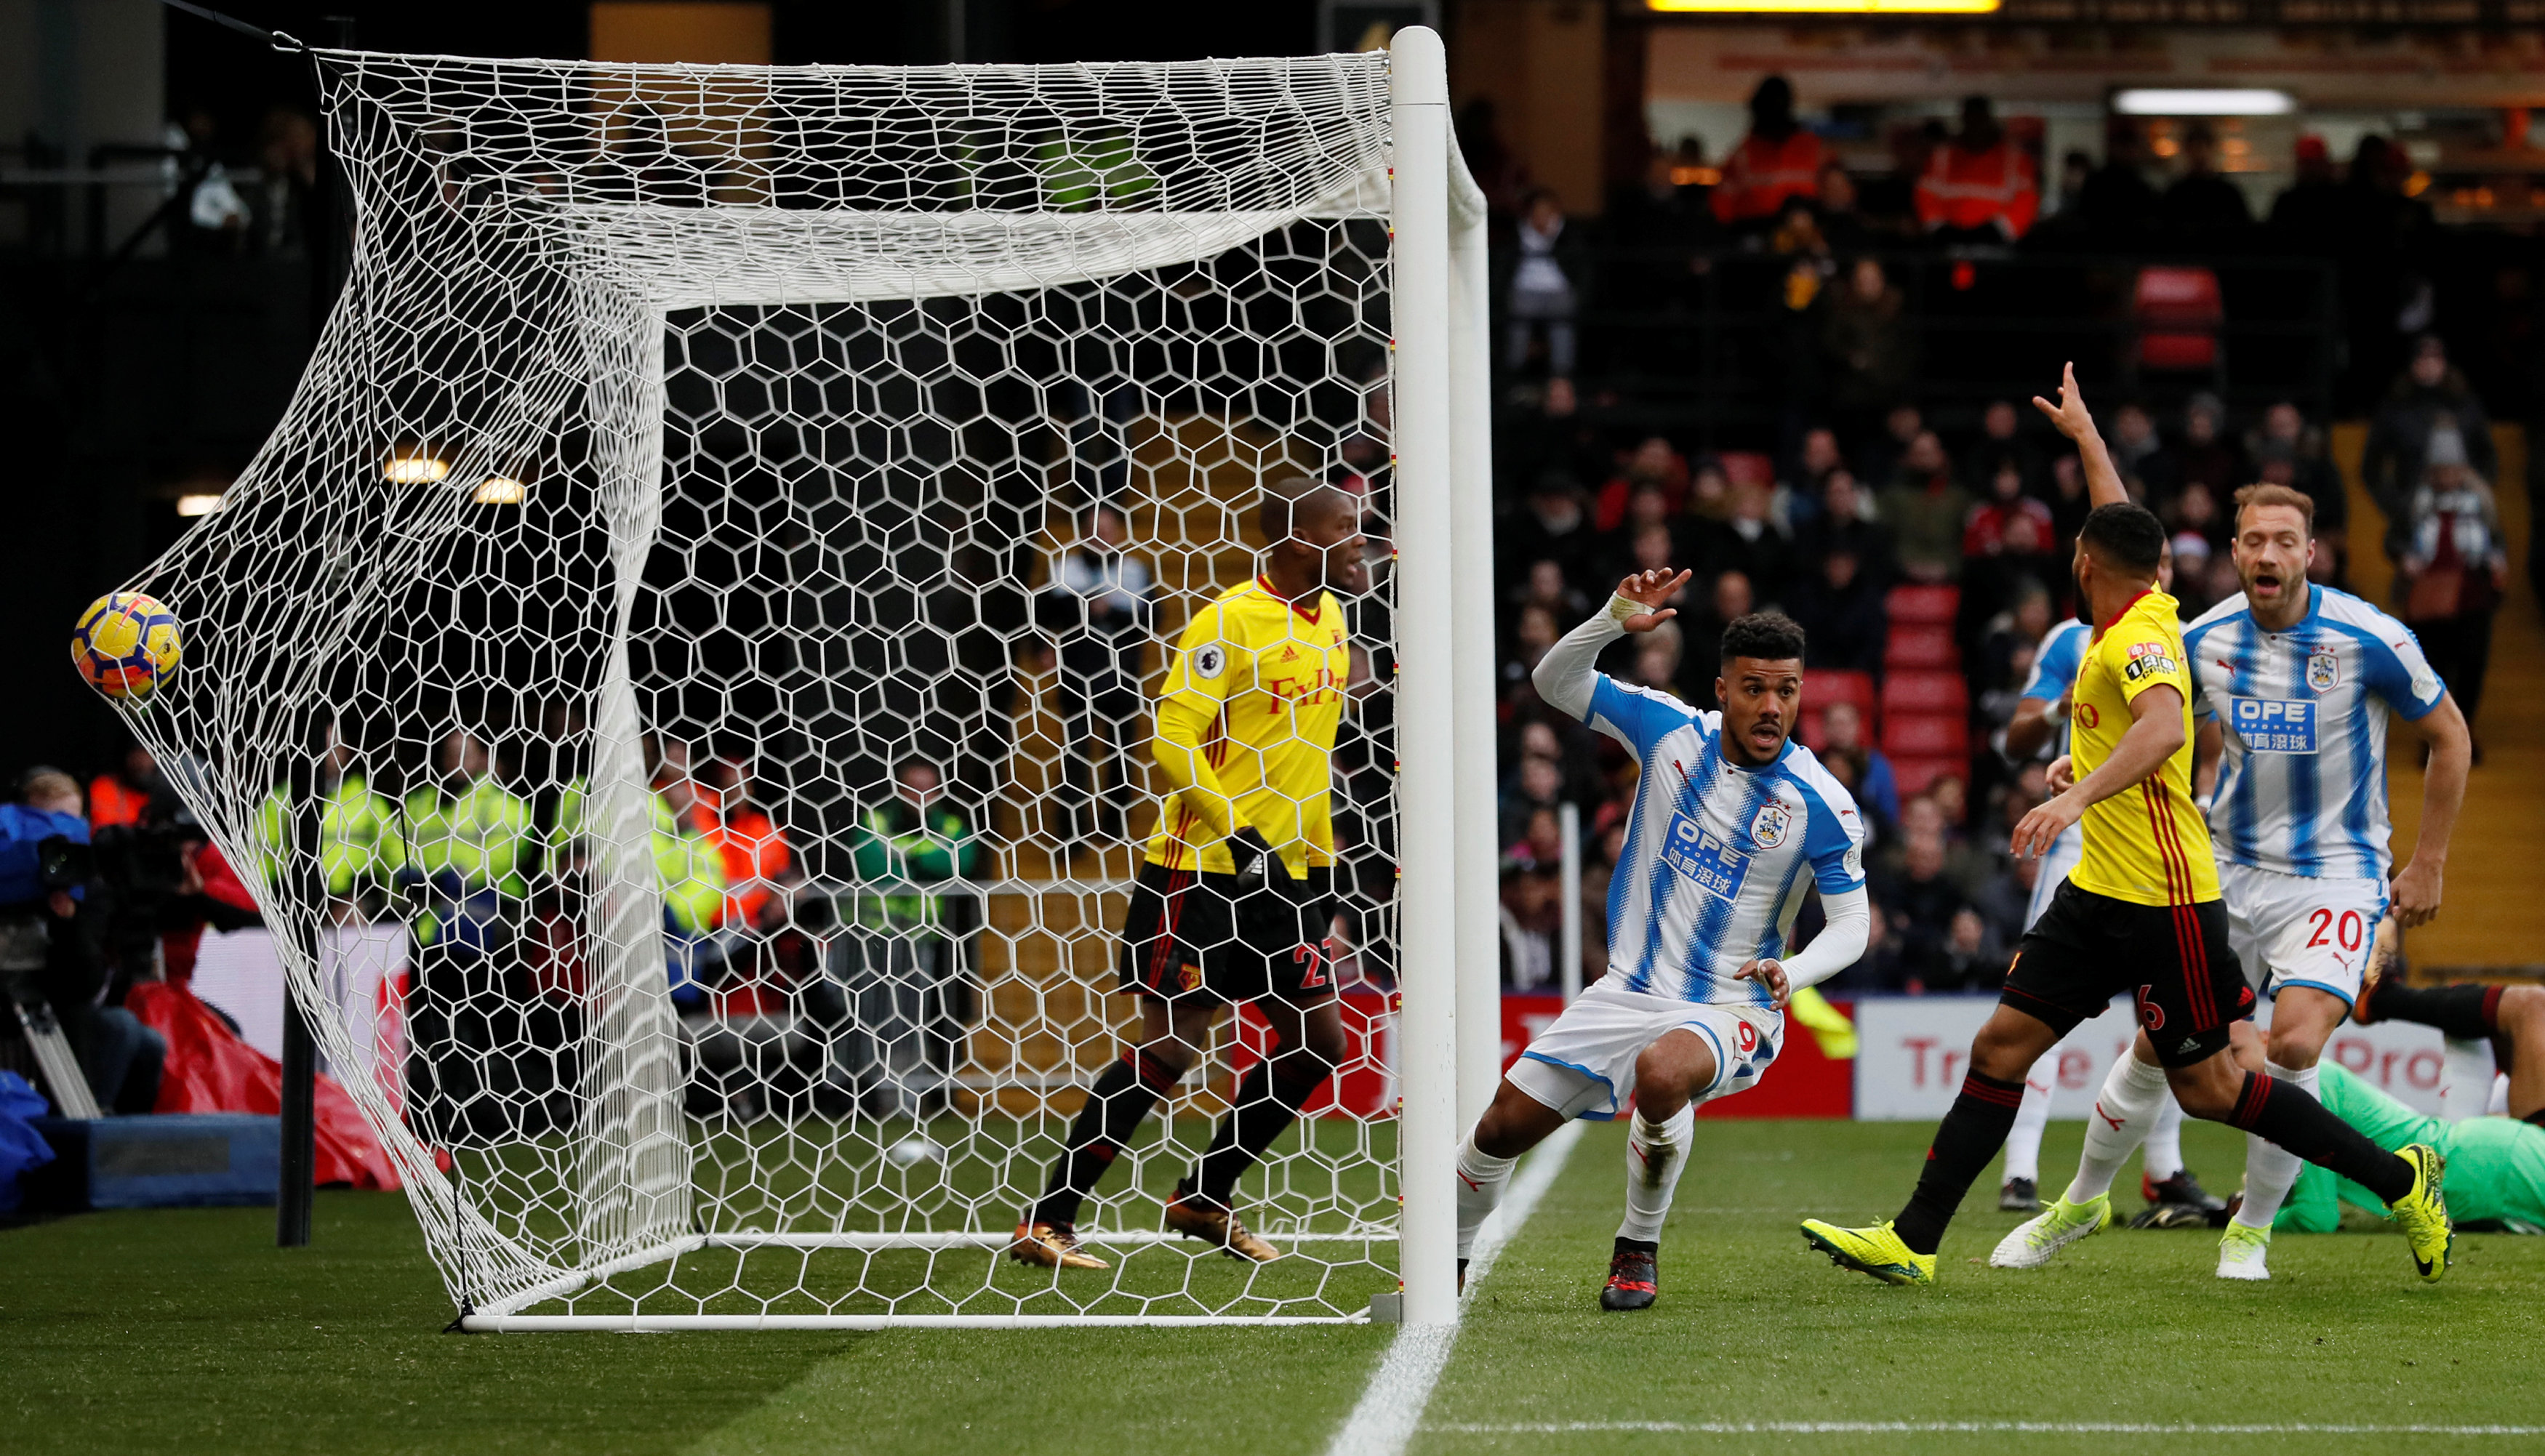 Football: Huddersfield end away drought in style with win at Watford